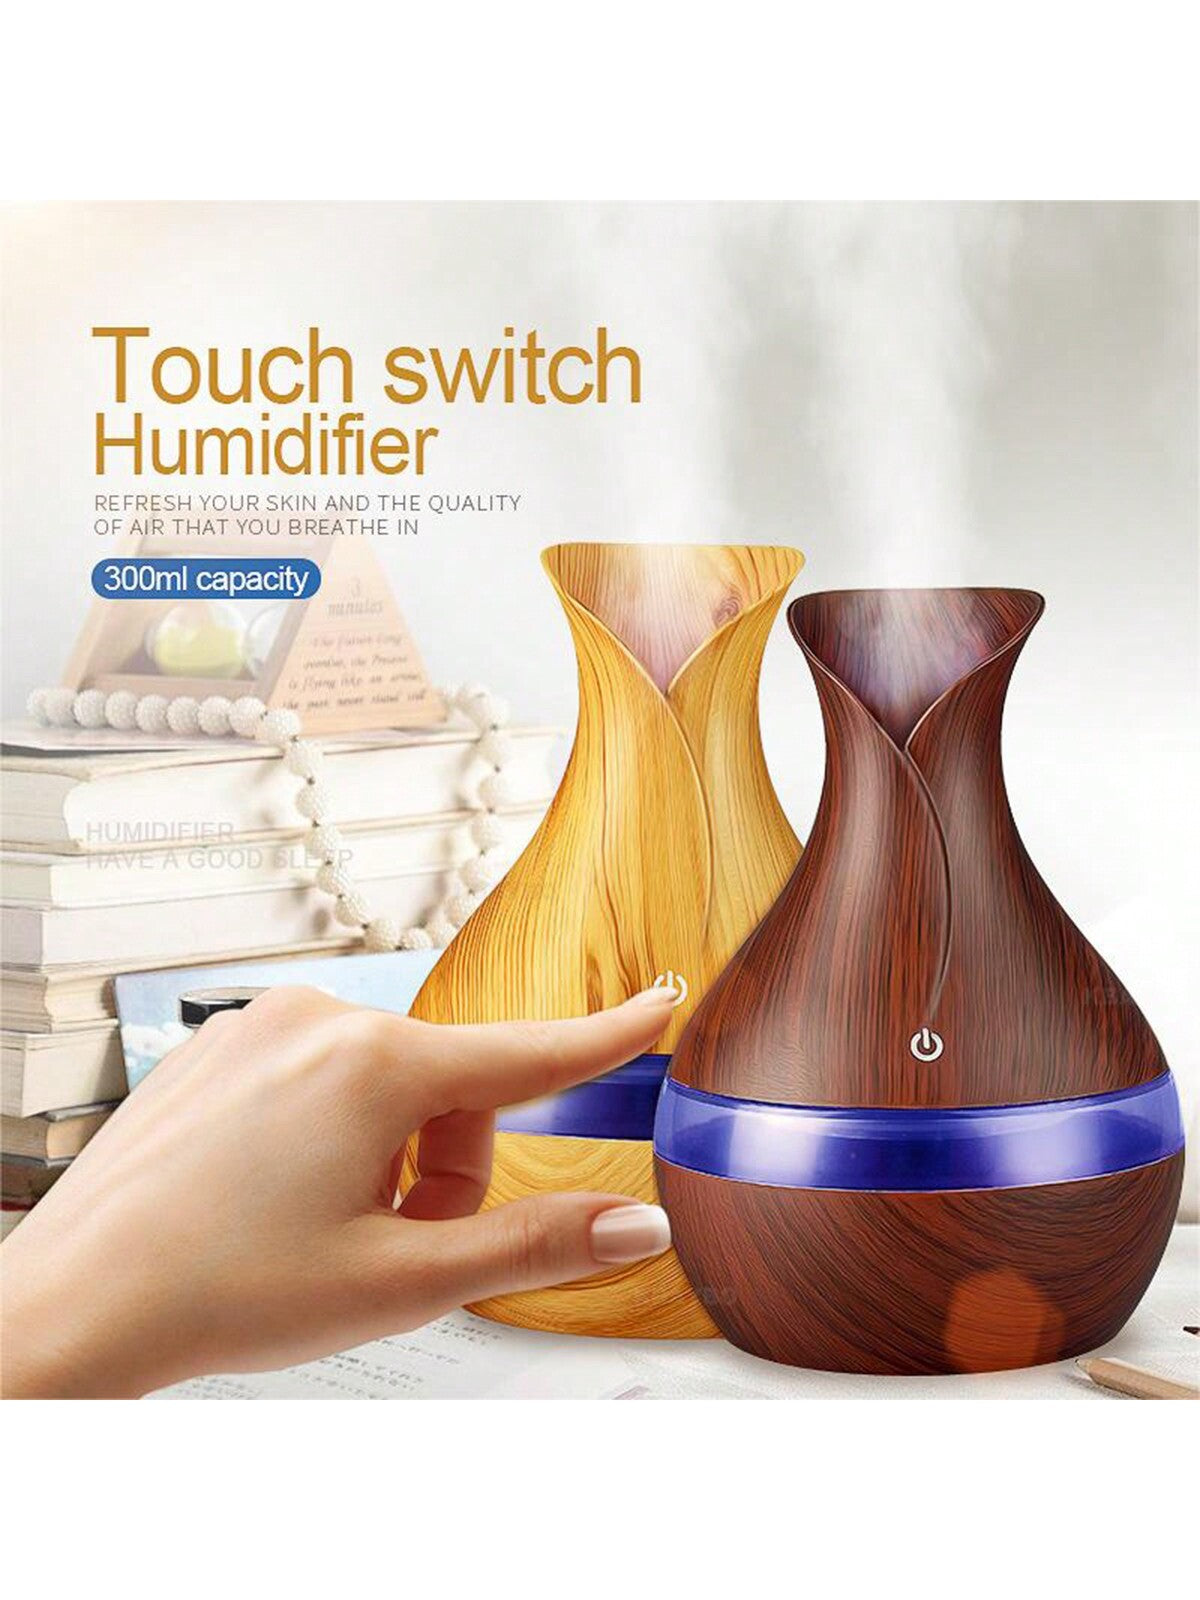 1pc Portable Desktop Usb Wood Grain Humidifier, Aroma Diffuser, Atomizer, Moisturizer, Air Purifier With Flower Vase Design, Suitable For Home, Bedroom, Outdoor, Travel-light wood grain-3